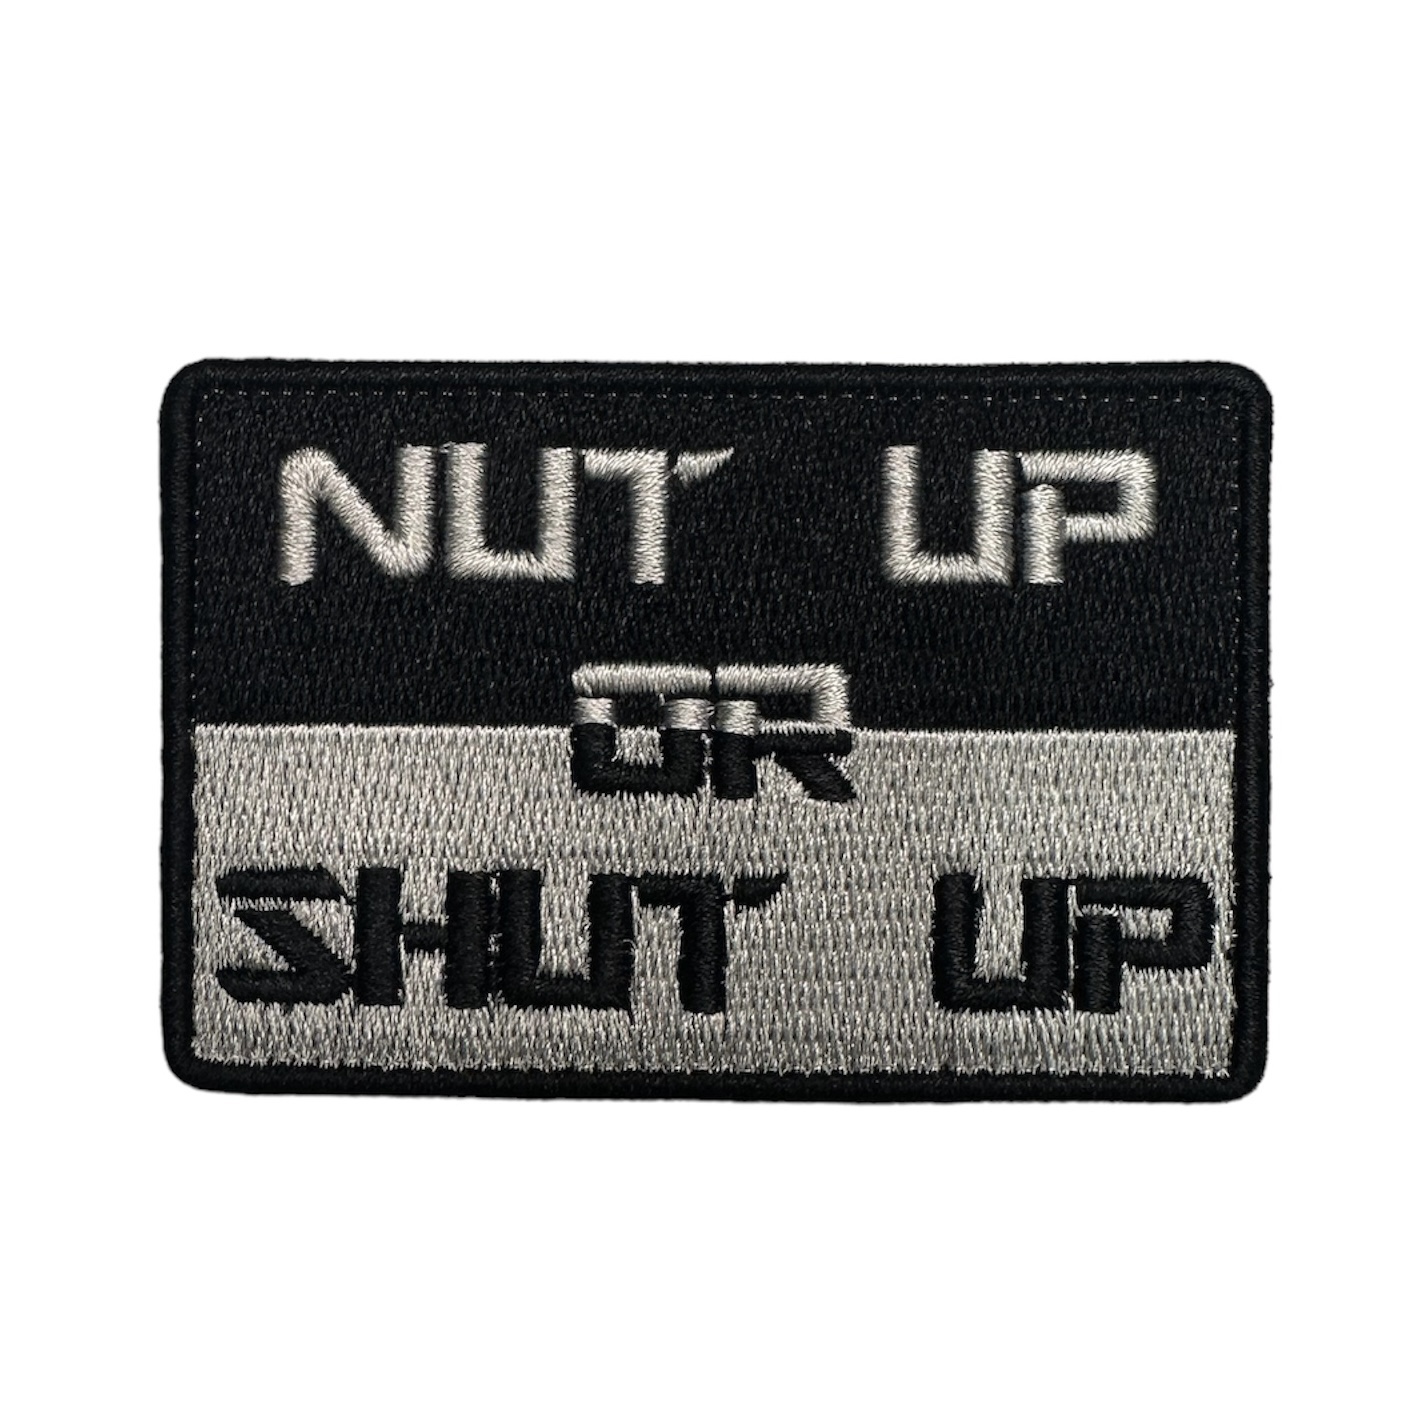 Embroidery Patch - Nut Up or Shut Up Morale Patch